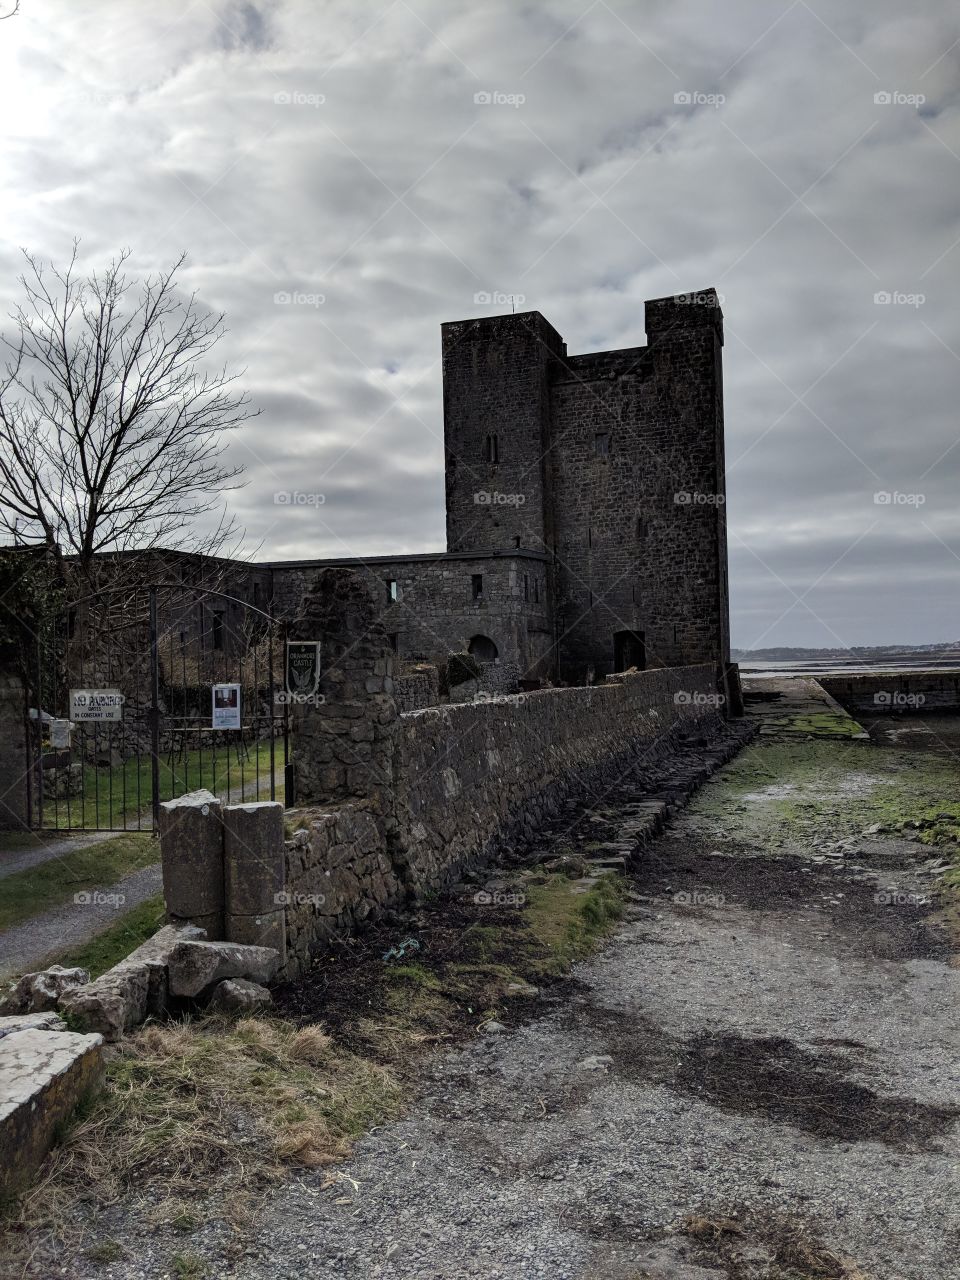 One of many old castle's in Ireland